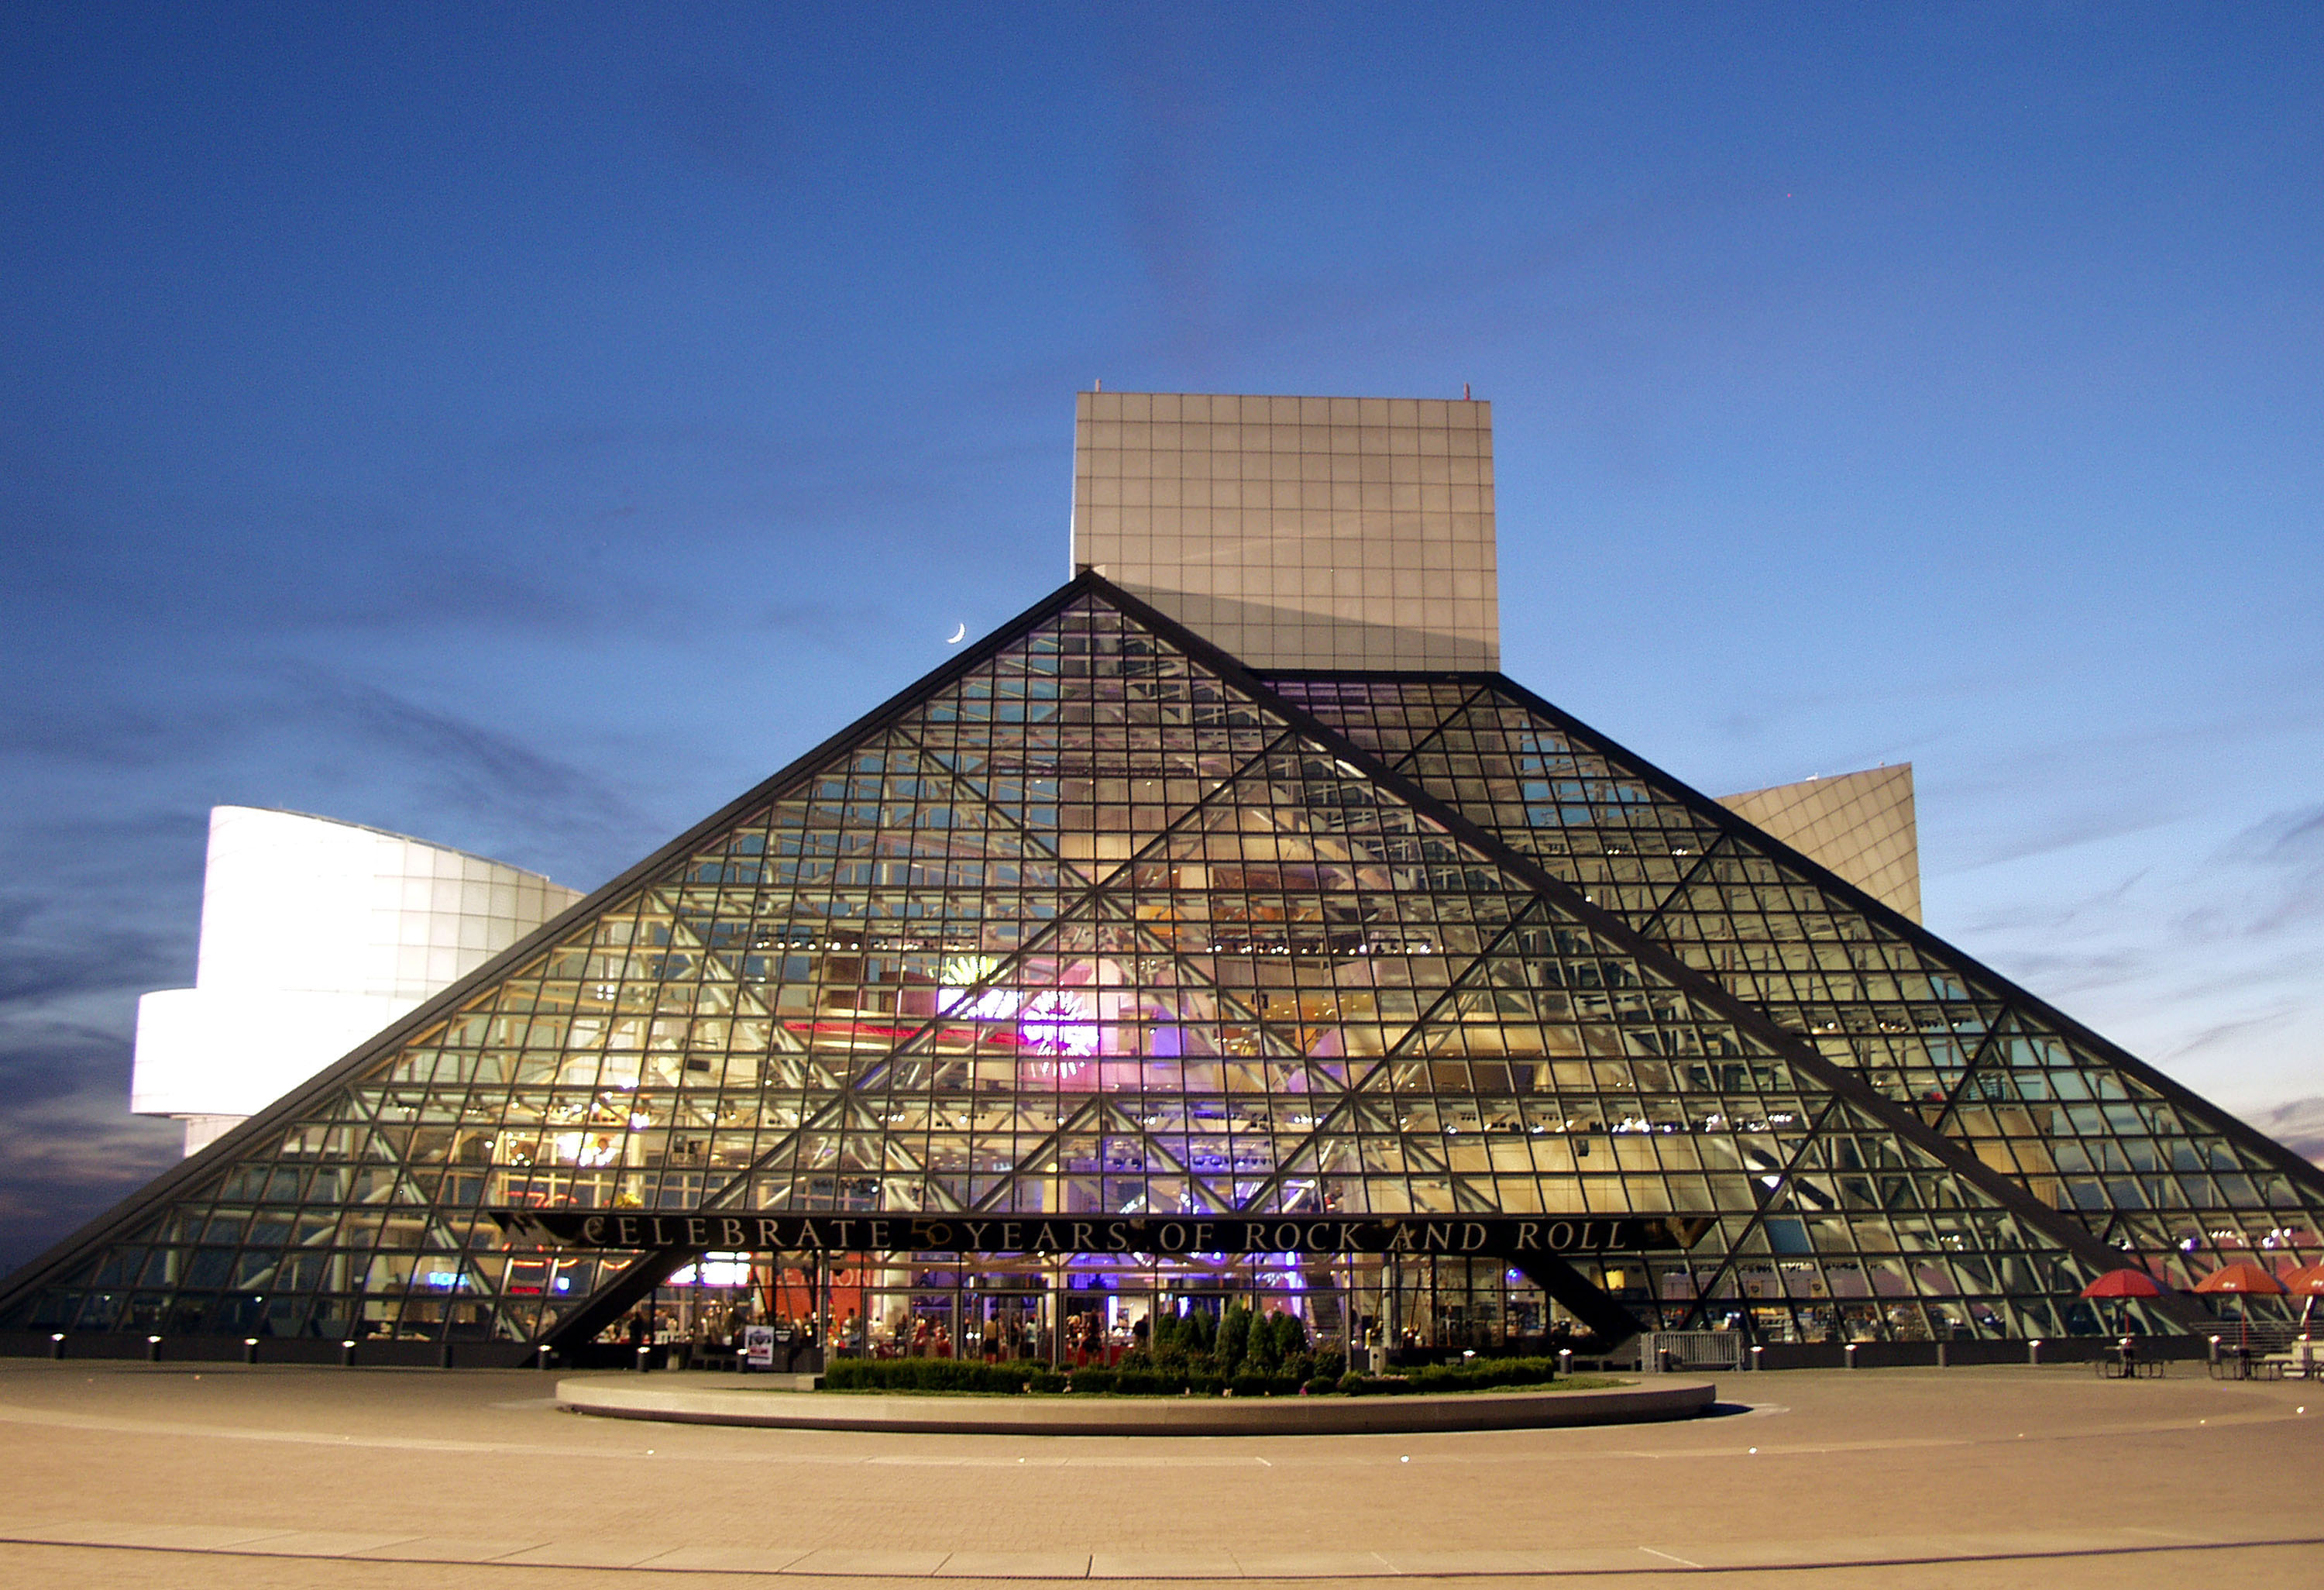 The glass exterior of the Rock & Roll Hall of Fame